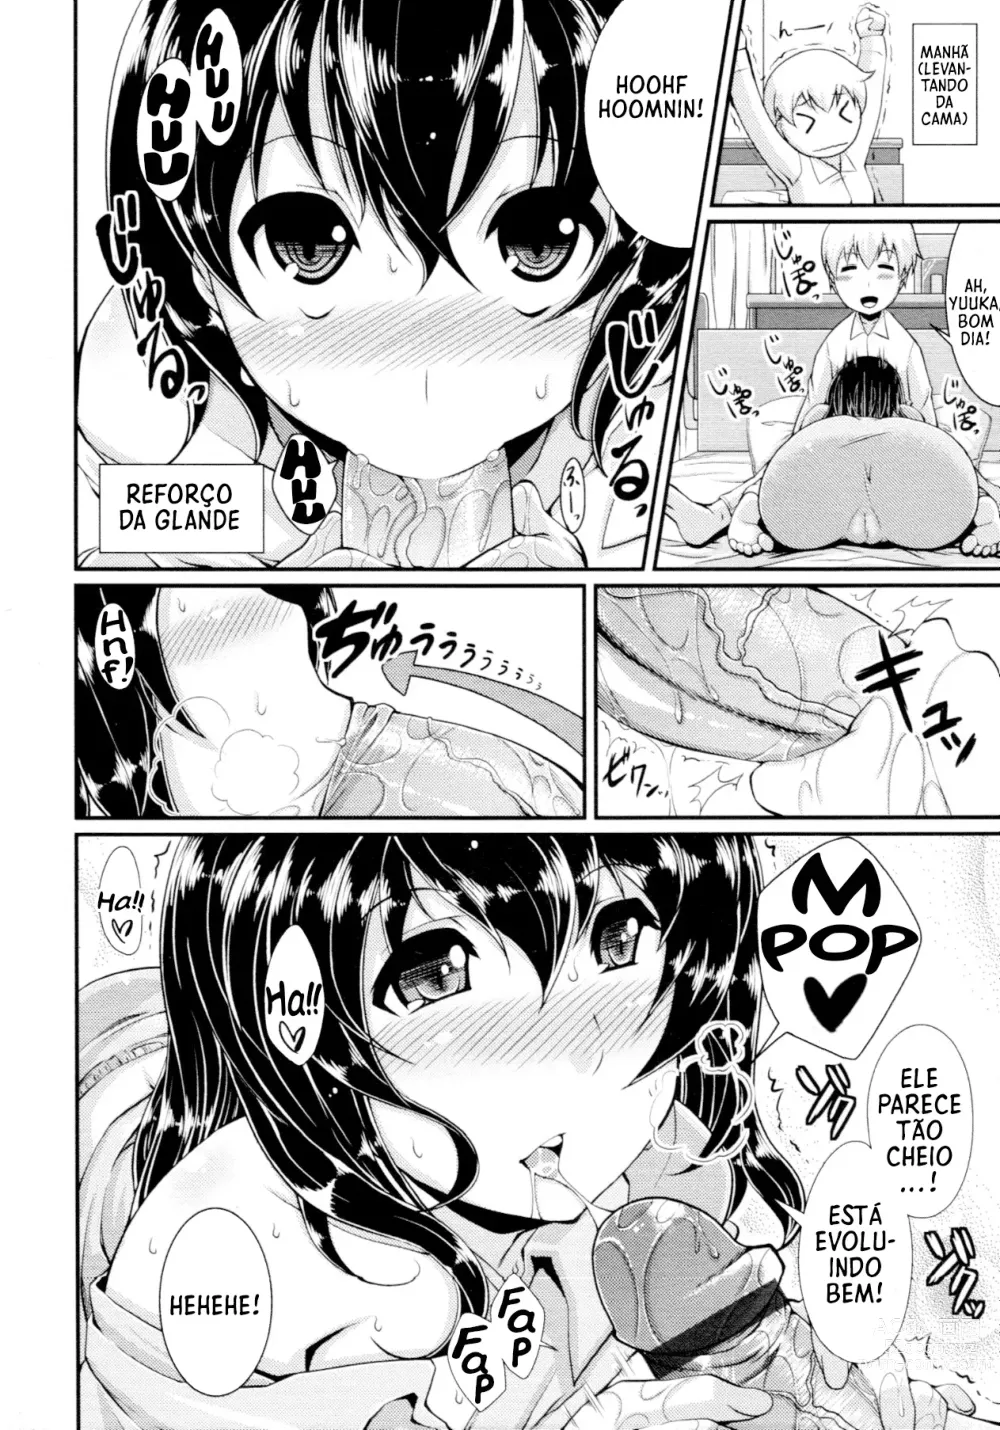 Page 4 of doujinshi The Sex Life of the Tachibanas